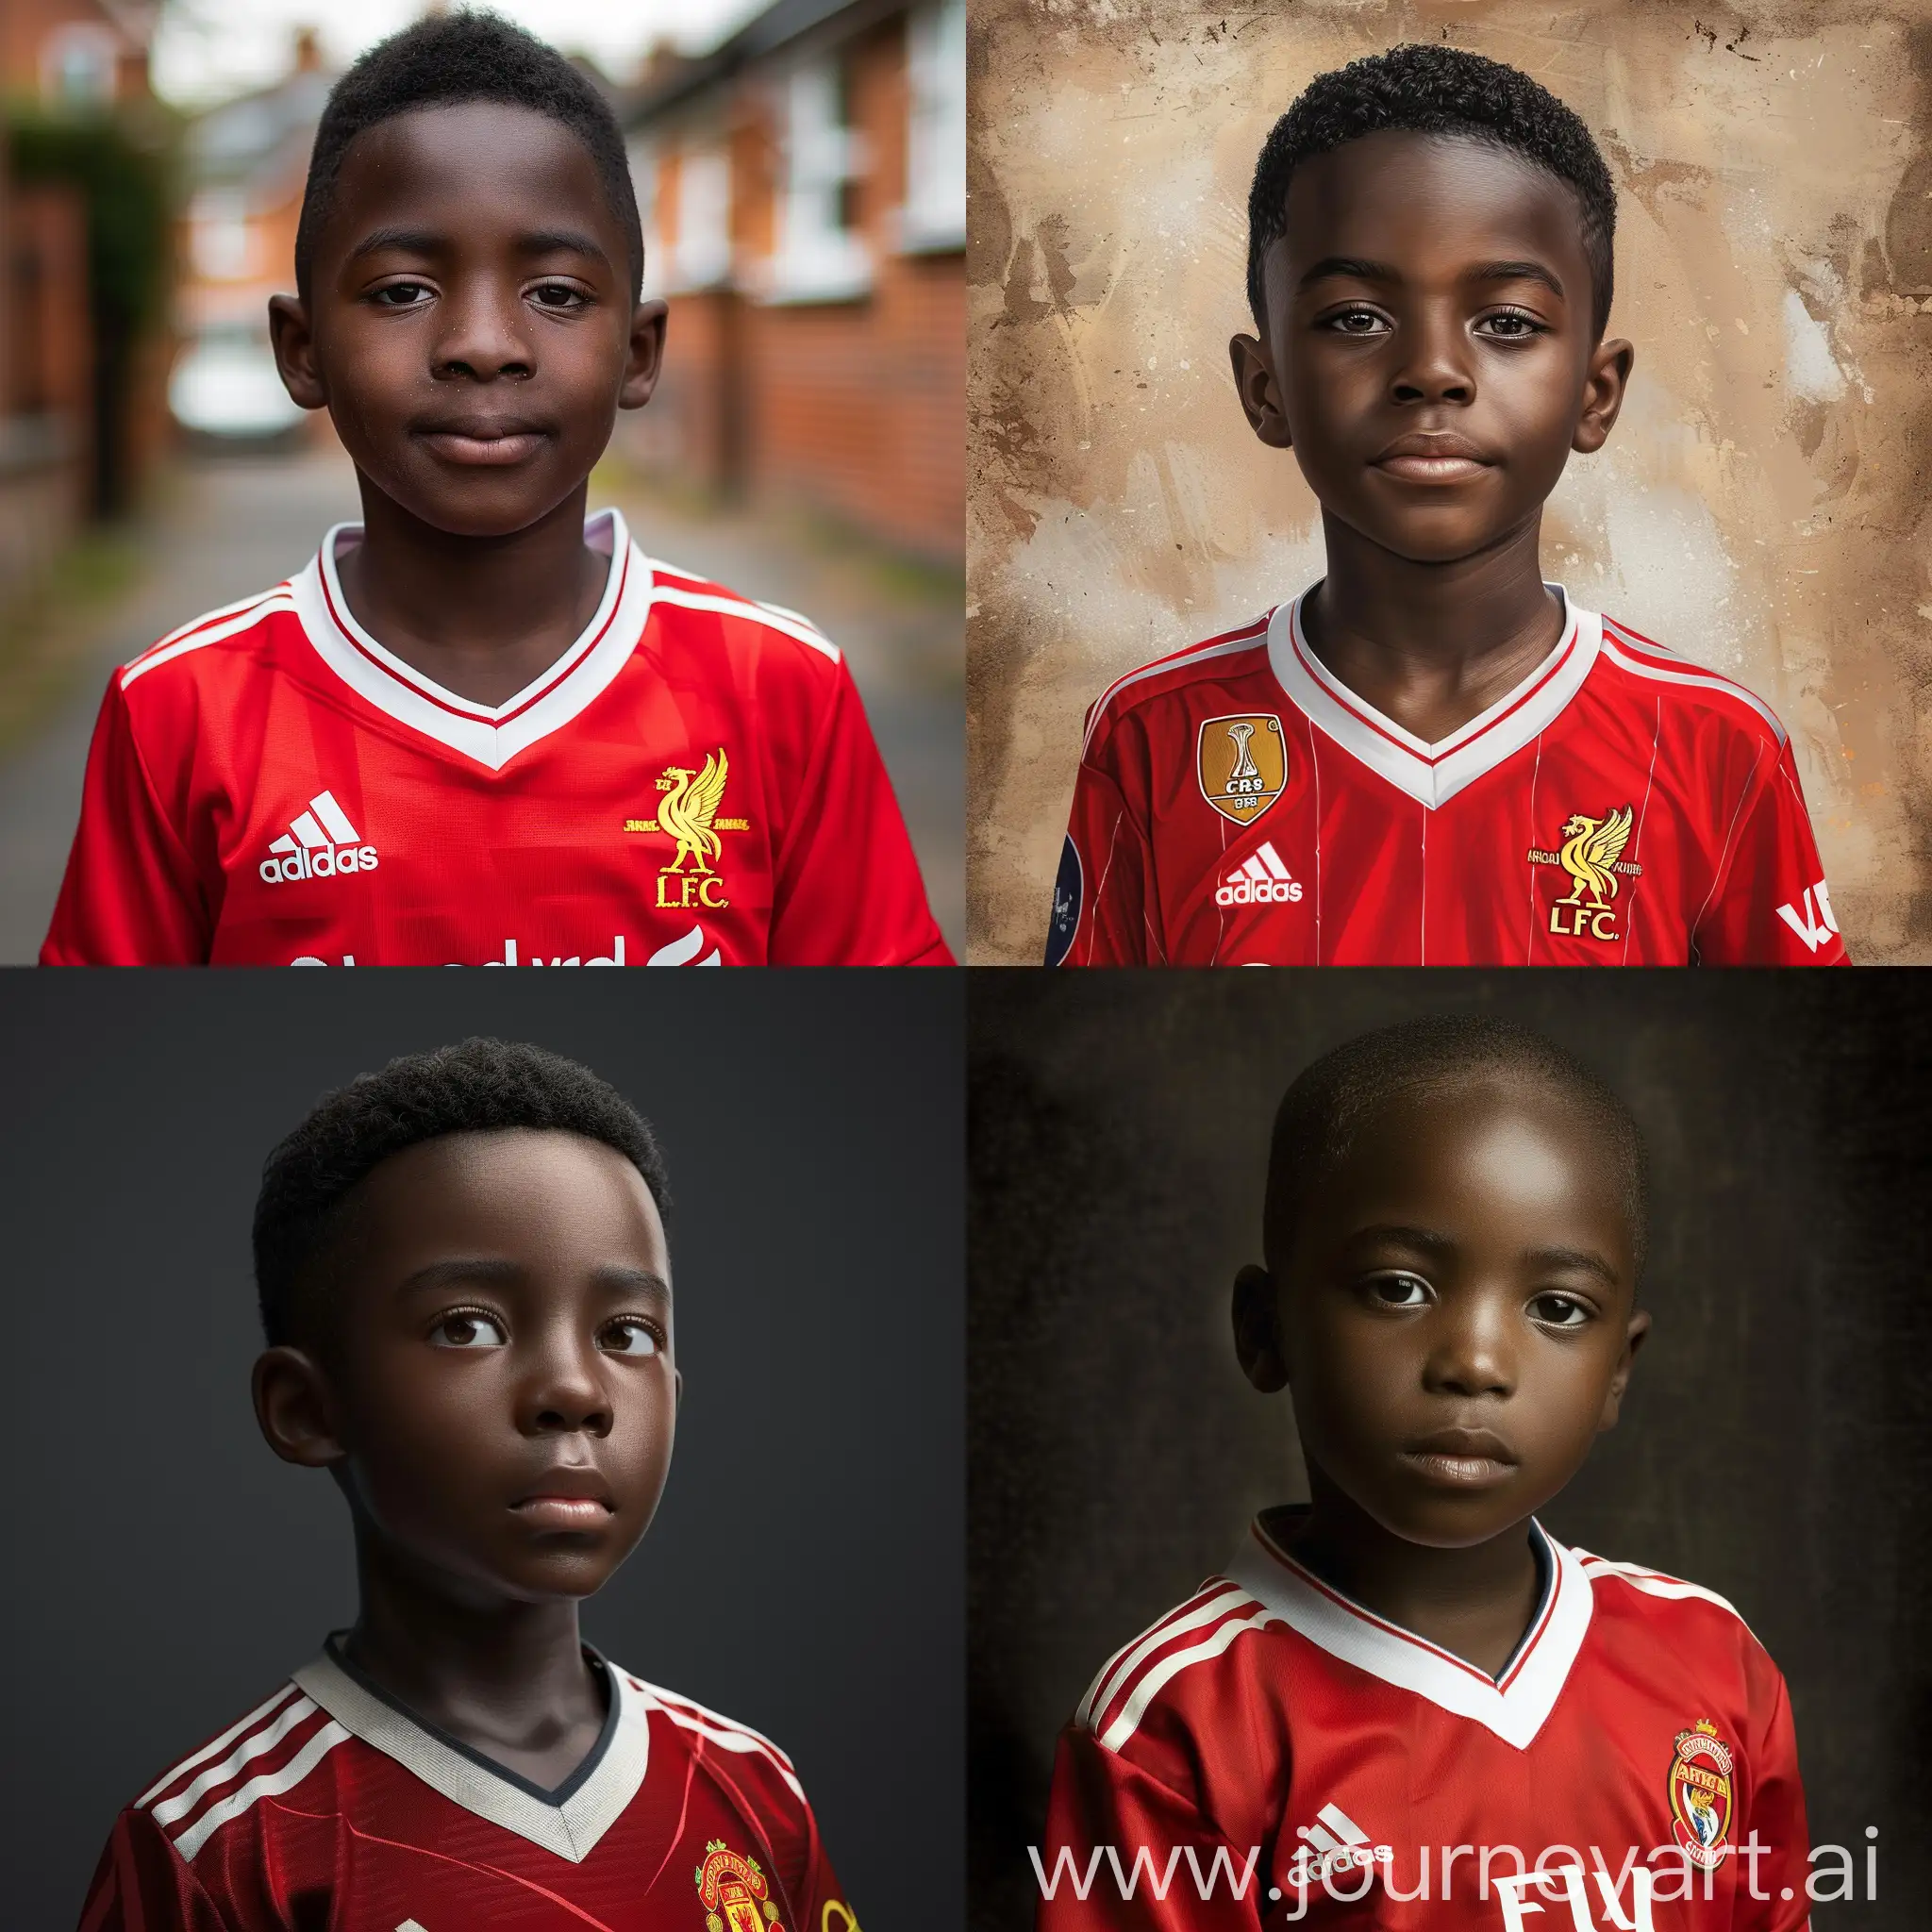 Young-Arsenal-Fan-Wearing-Iconic-Jersey